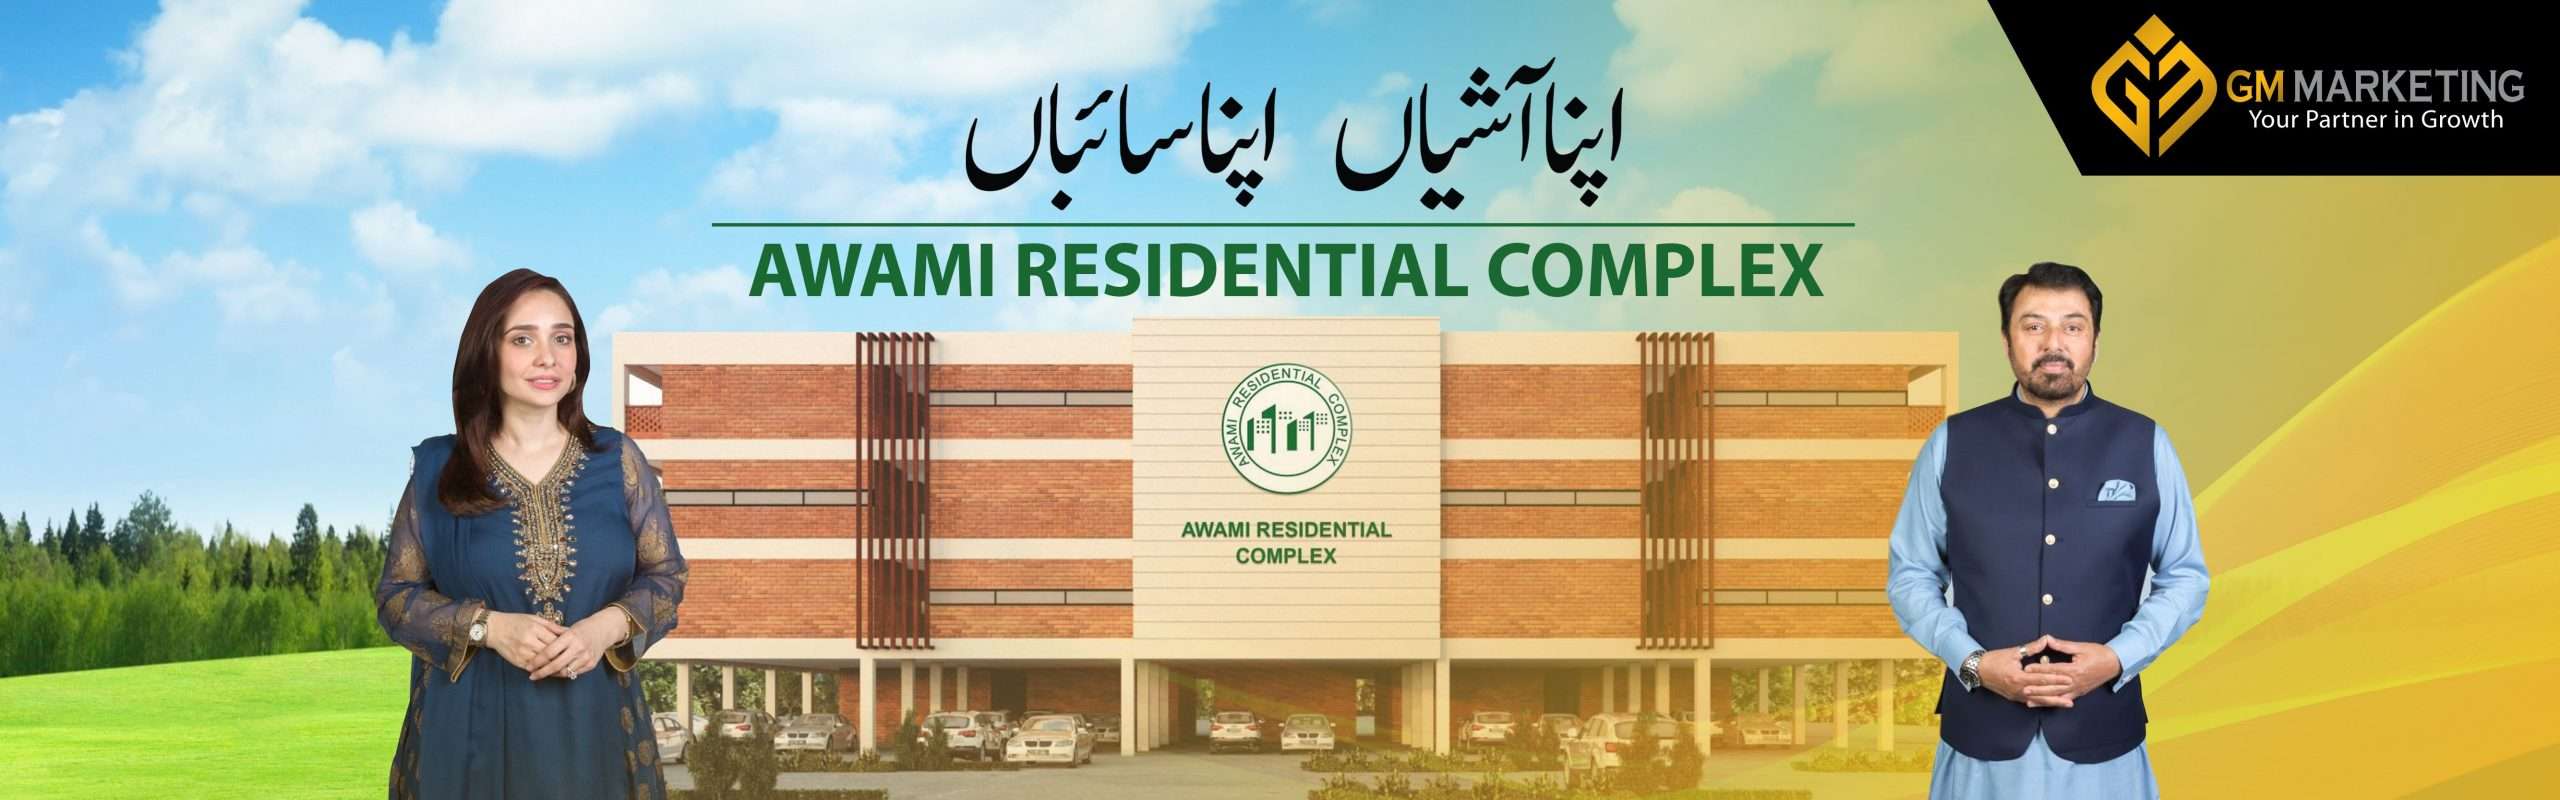 awami residential complex